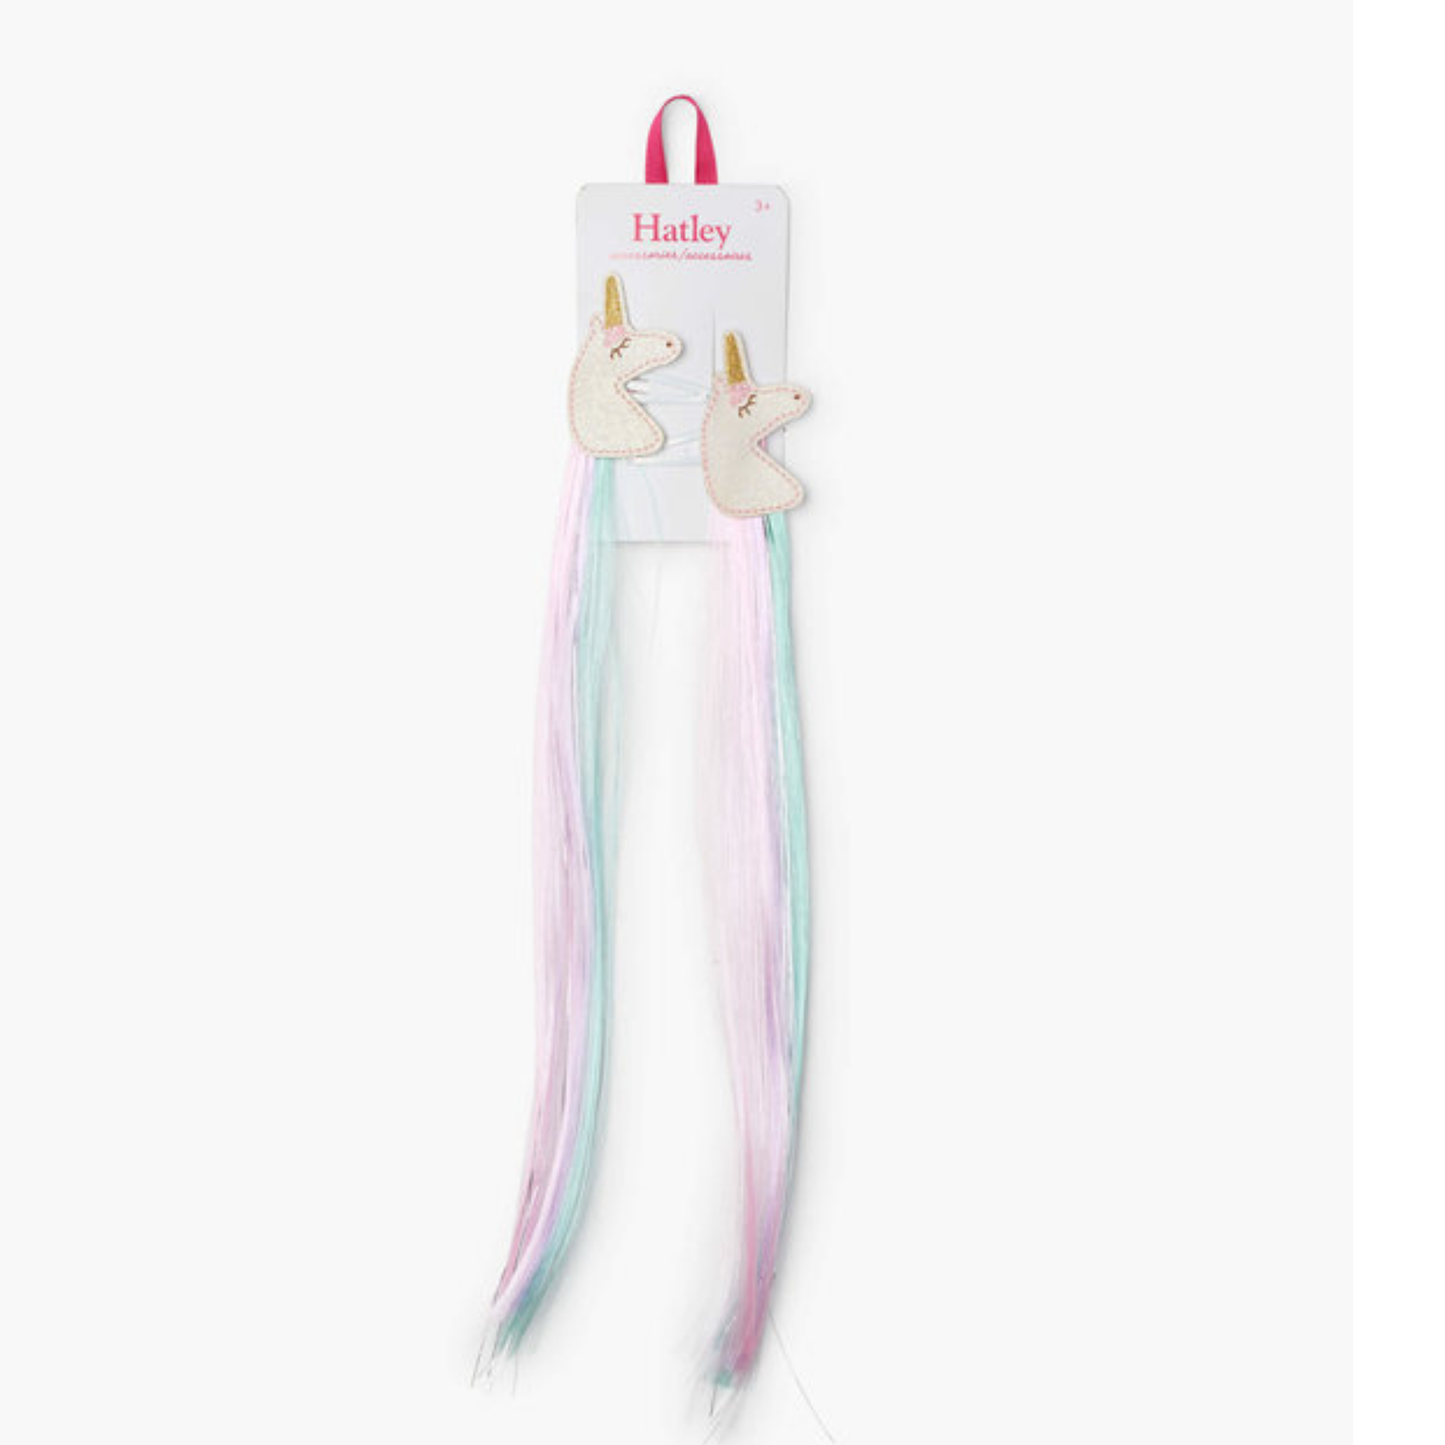 Hatley Unicorn 2 Pack Hair Clip In Extentions